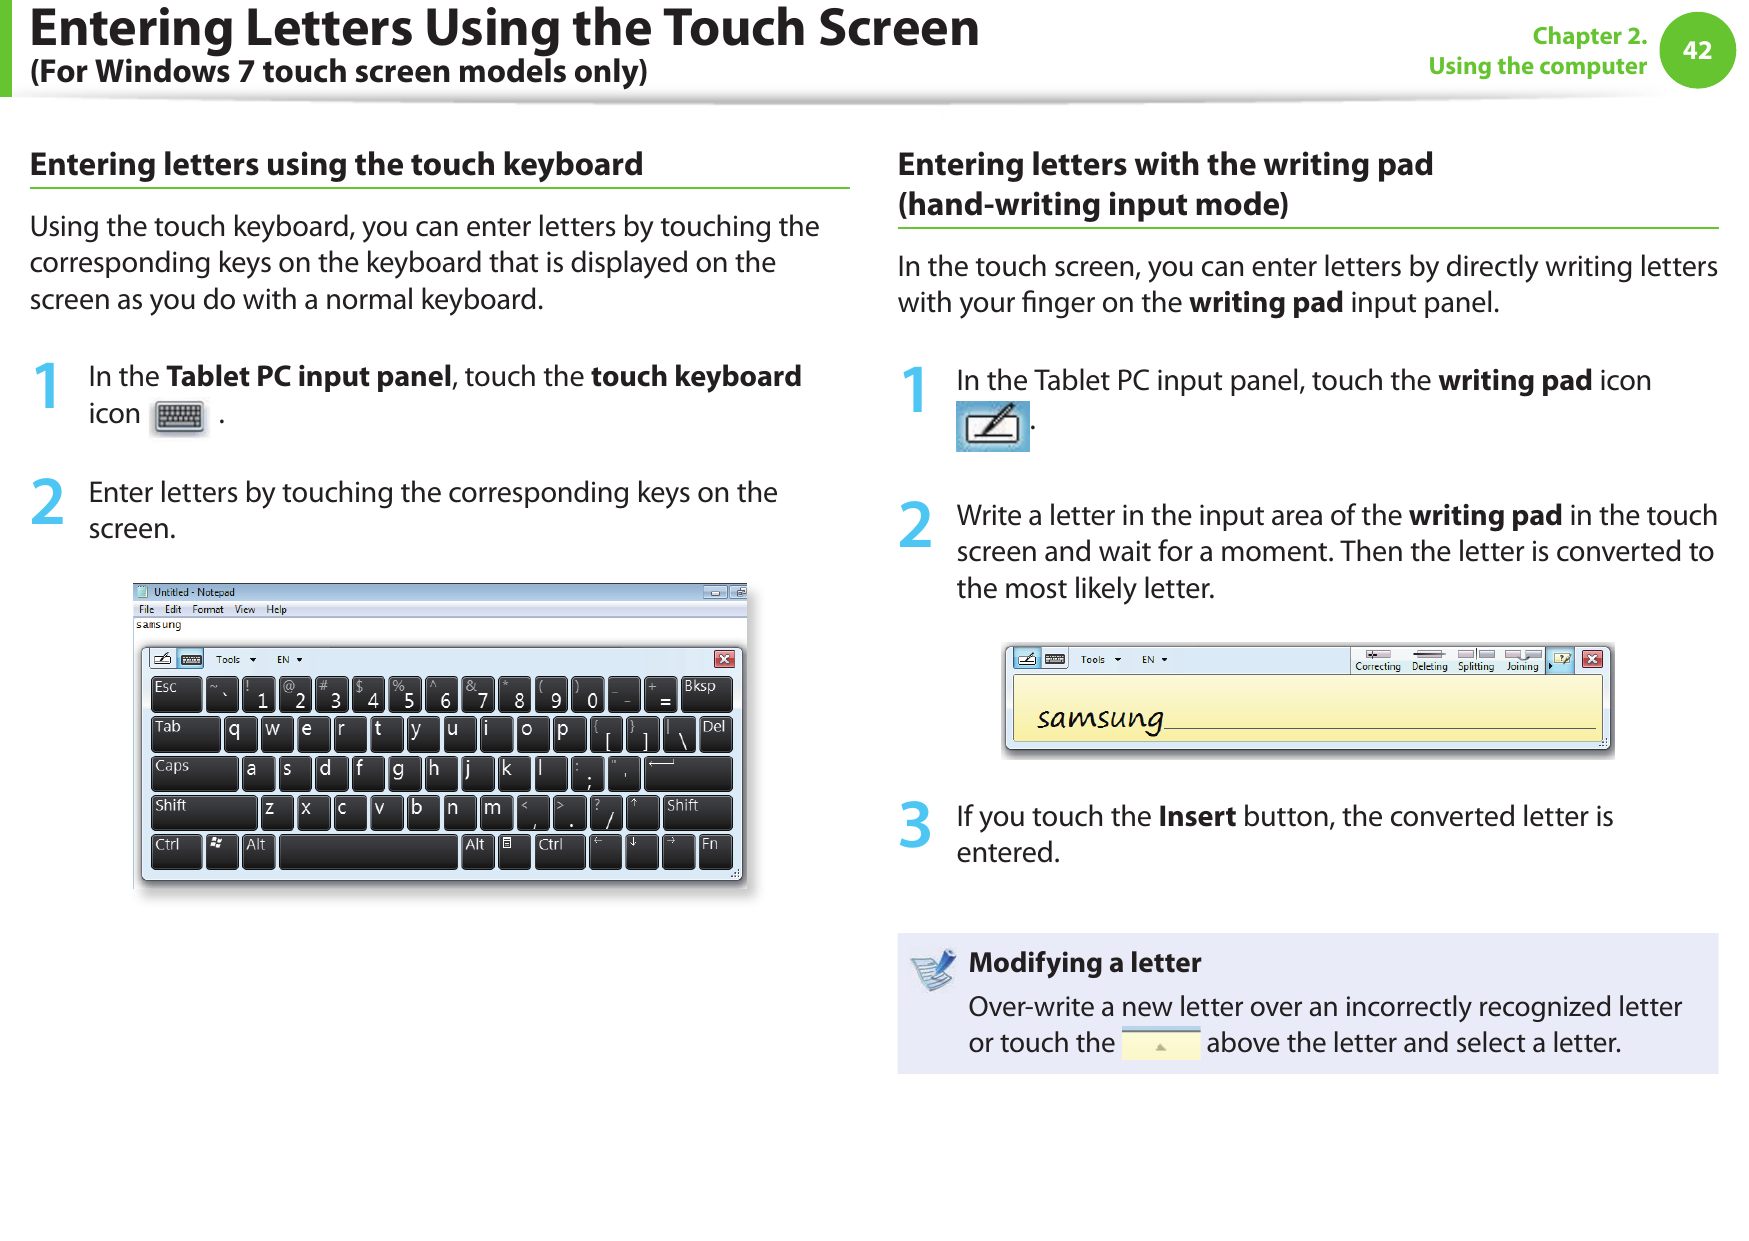 42Chapter 2. Using the computerEntering Letters Using the Touch Screen (For Windows 7 touch screen models only)Entering letters using the touch keyboardUsing the touch keyboard, you can enter letters by touching the corresponding keys on the keyboard that is displayed on the screen as you do with a normal keyboard.1  In the Tablet PC input panel, touch the touch keyboard icon   .2  Enter letters by touching the corresponding keys on the screen.Entering letters with the writing pad (hand-writing input mode)In the touch screen, you can enter letters by directly writing letters with your  nger on the writing pad input panel.1  In the Tablet PC input panel, touch the writing pad icon .2  Write a letter in the input area of the writing pad in the touch screen and wait for a moment. Then the letter is converted to the most likely letter.3  If you touch the Insert button, the converted letter is entered.Modifying a letterOver-write a new letter over an incorrectly recognized letter or touch the   above the letter and select a letter.